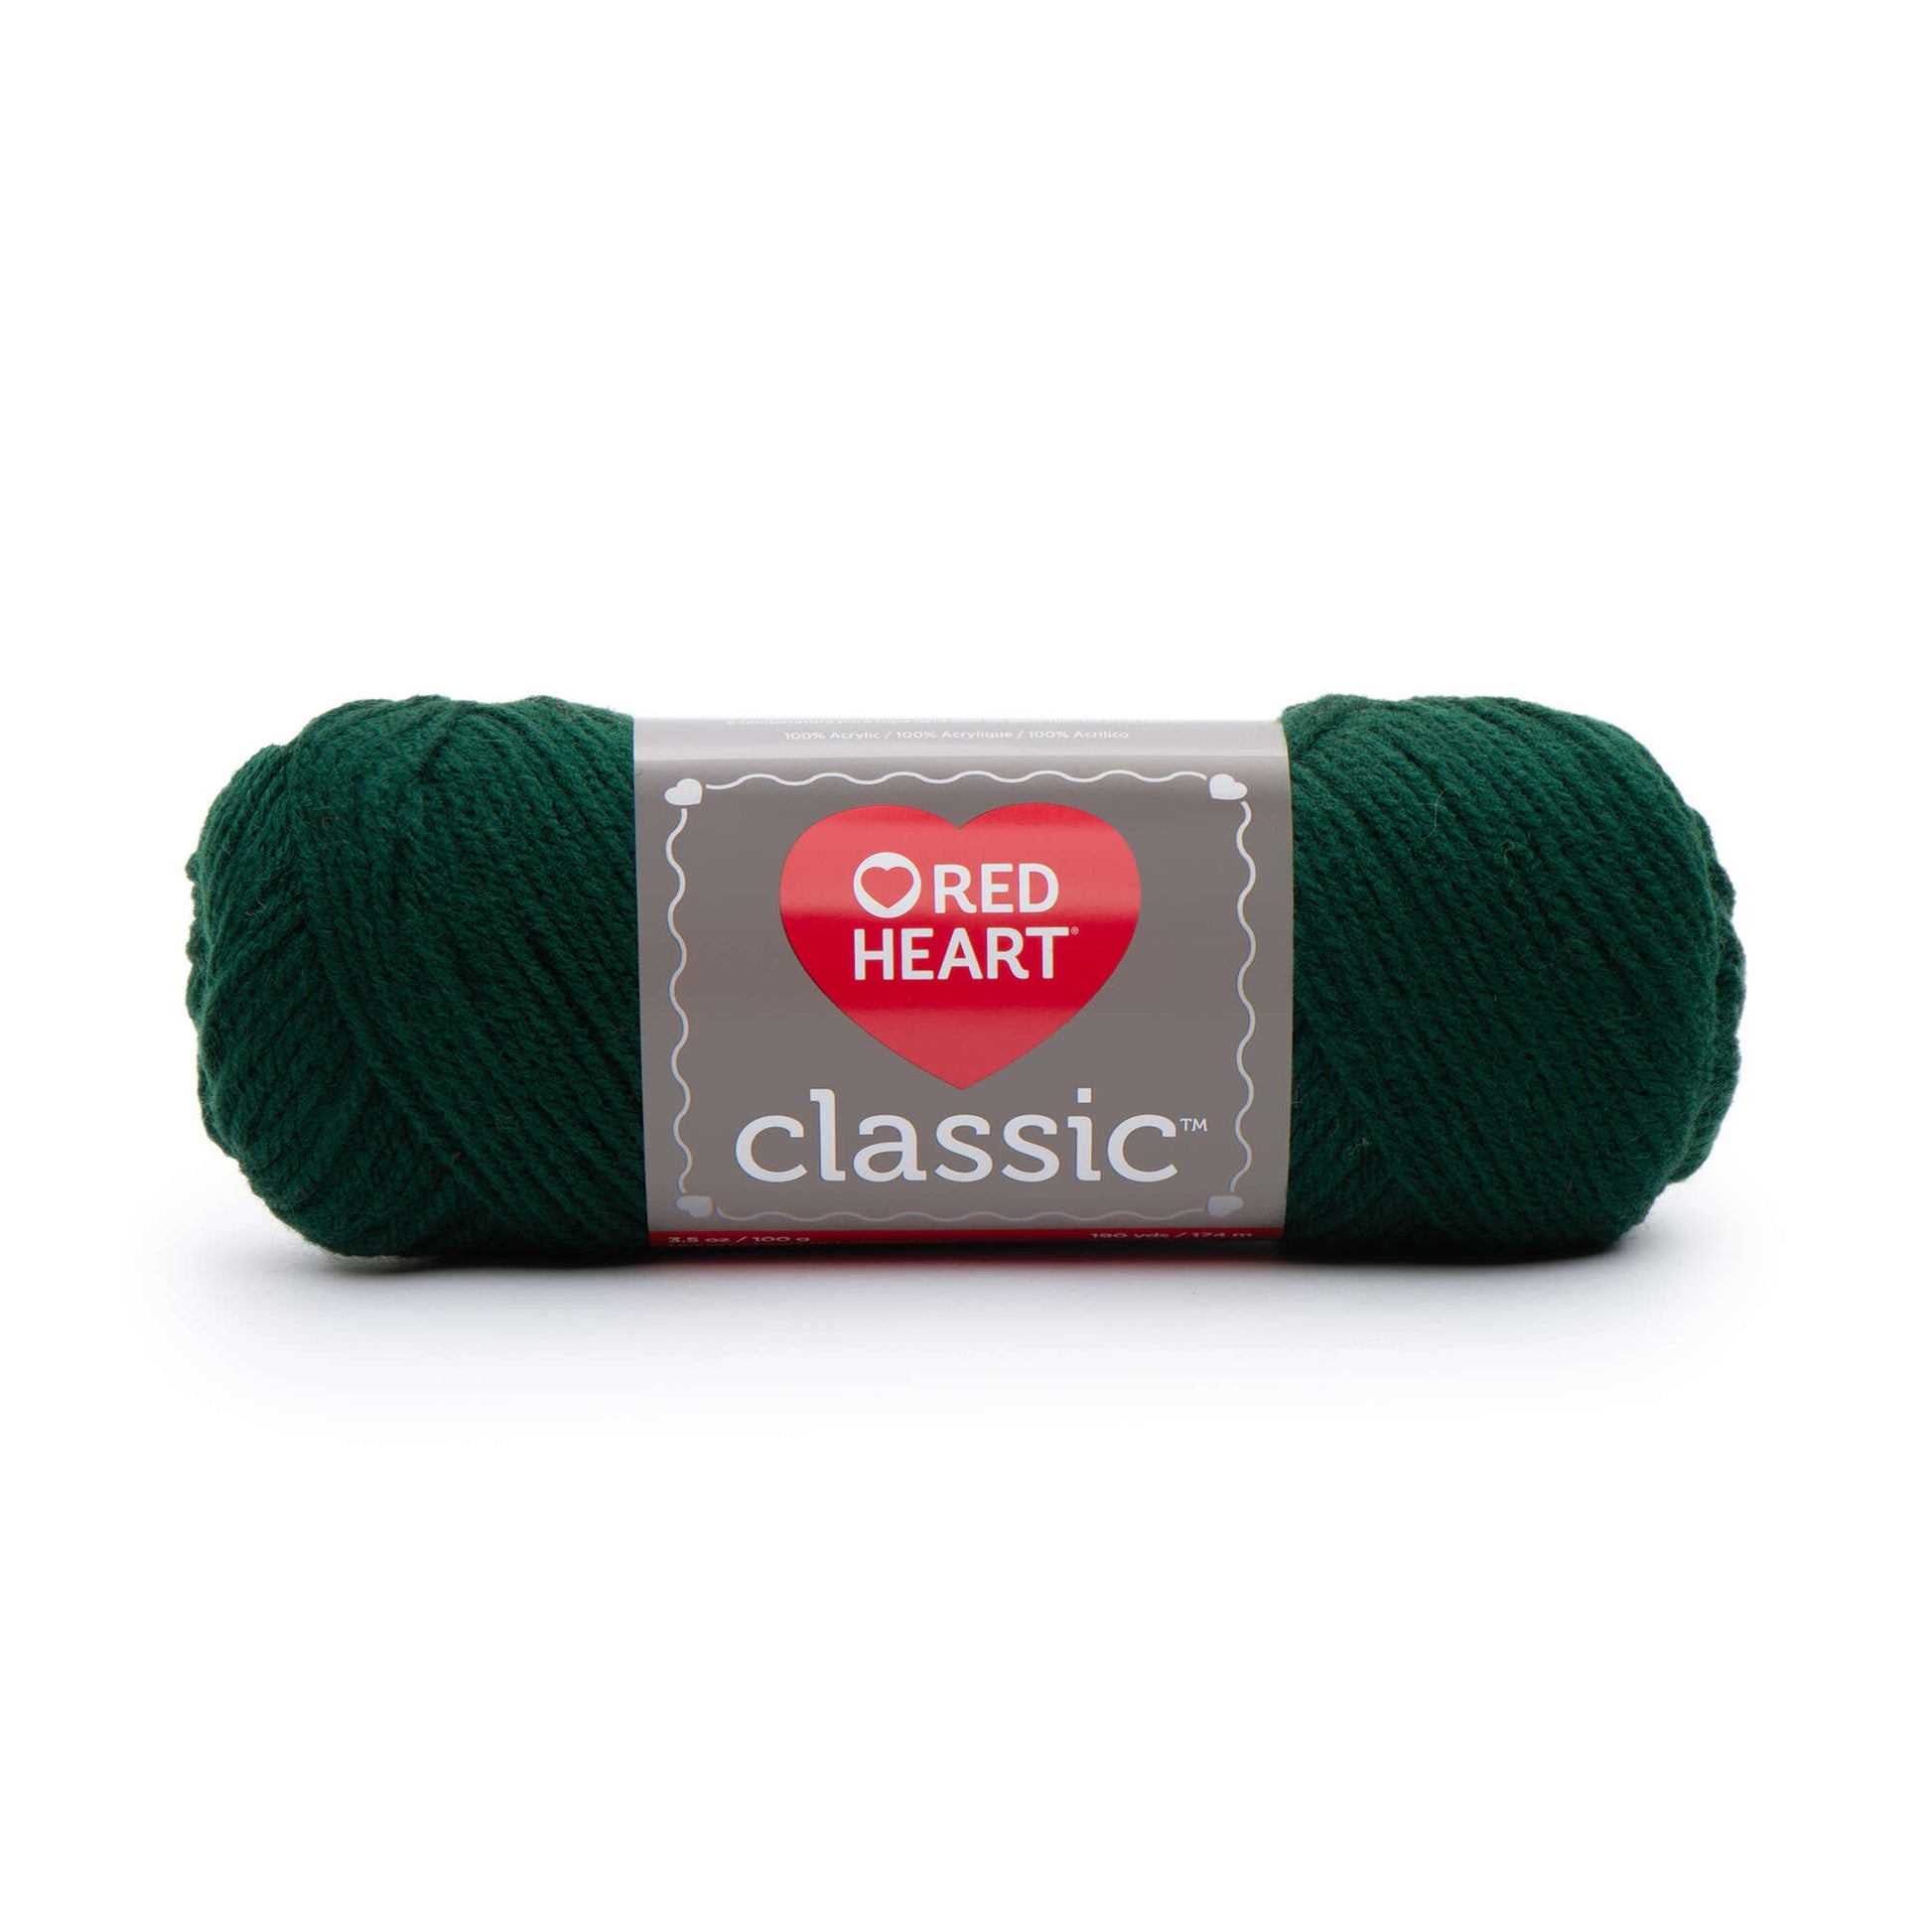 Red Heart Classic Yarn - Clearance shades Forest Green